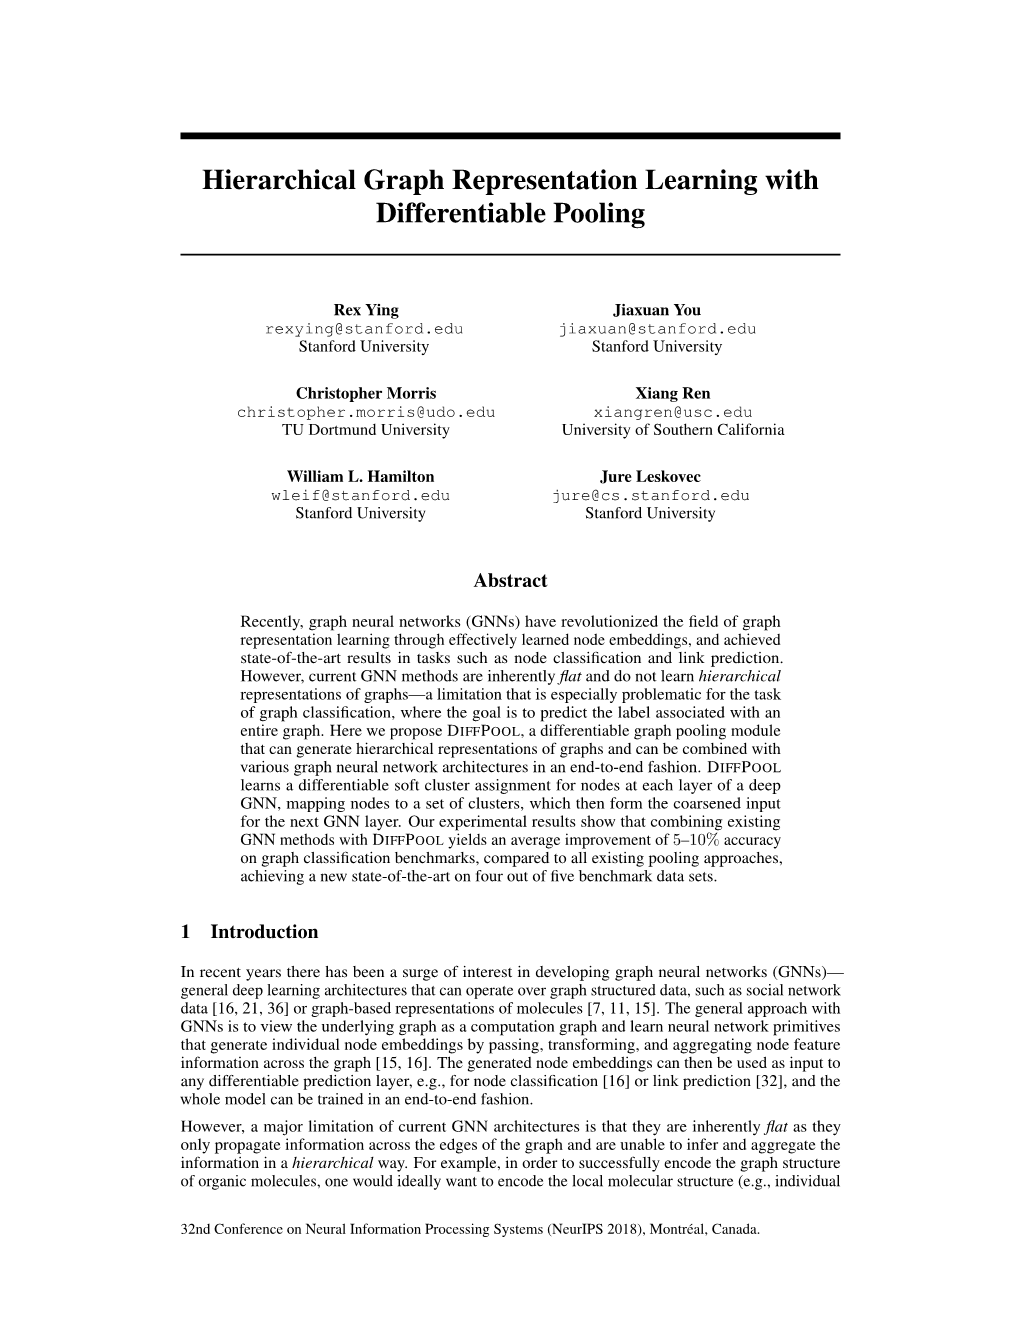 Hierarchical Graph Representation Learning with Differentiable Pooling